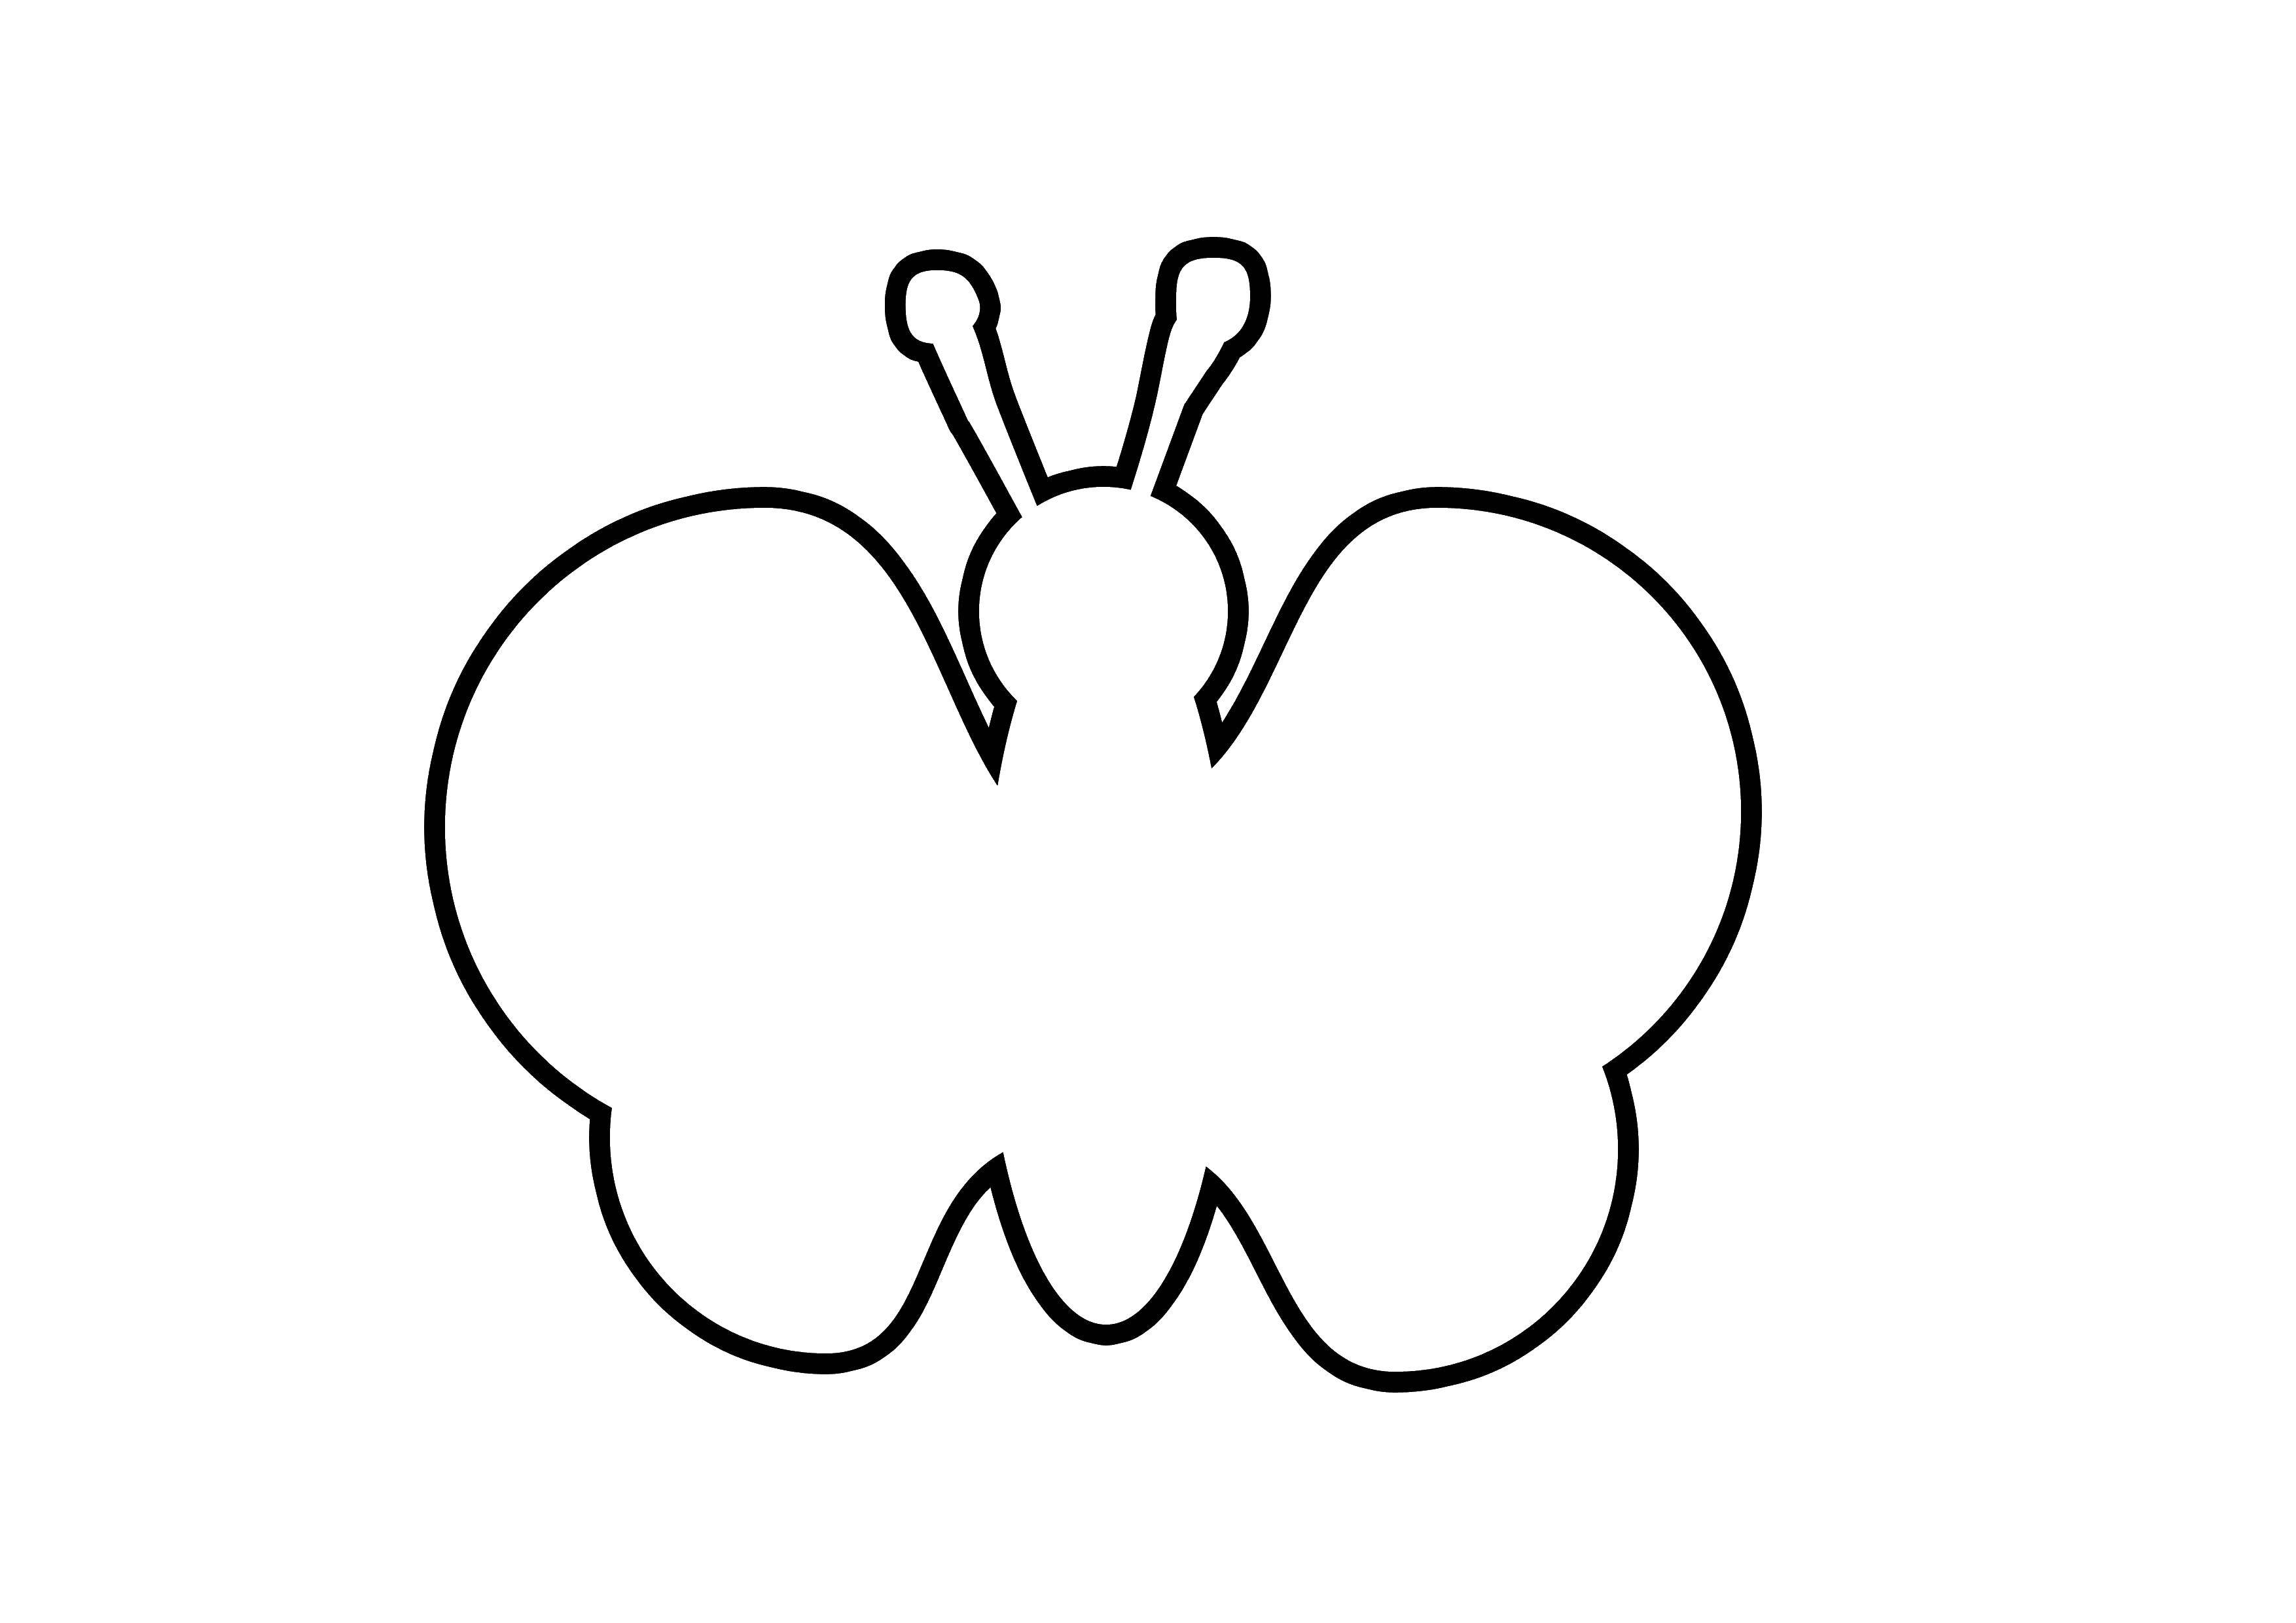 Coloring Butterfly. Category the contours for cutting out butterflies. Tags:  the contours, patterns, butterfly.